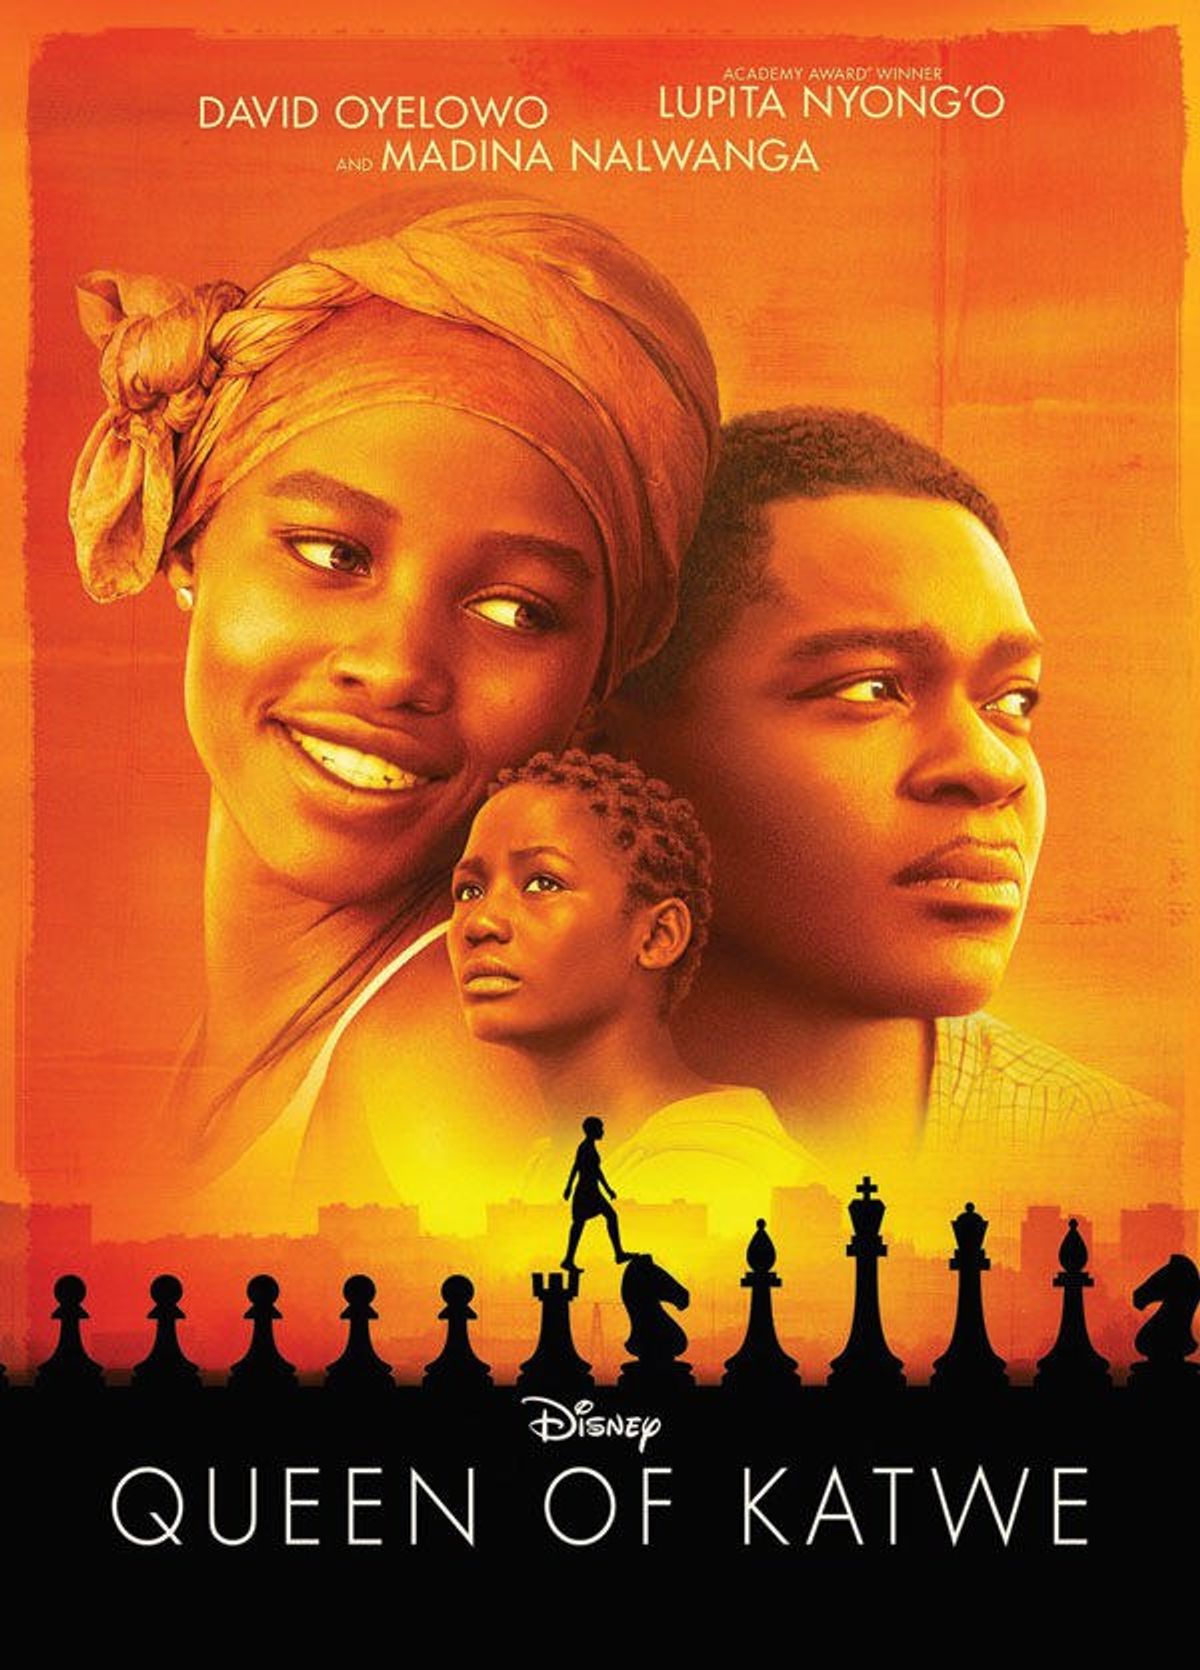 Reasons I Am Excited To See 'Queen of Katwe'